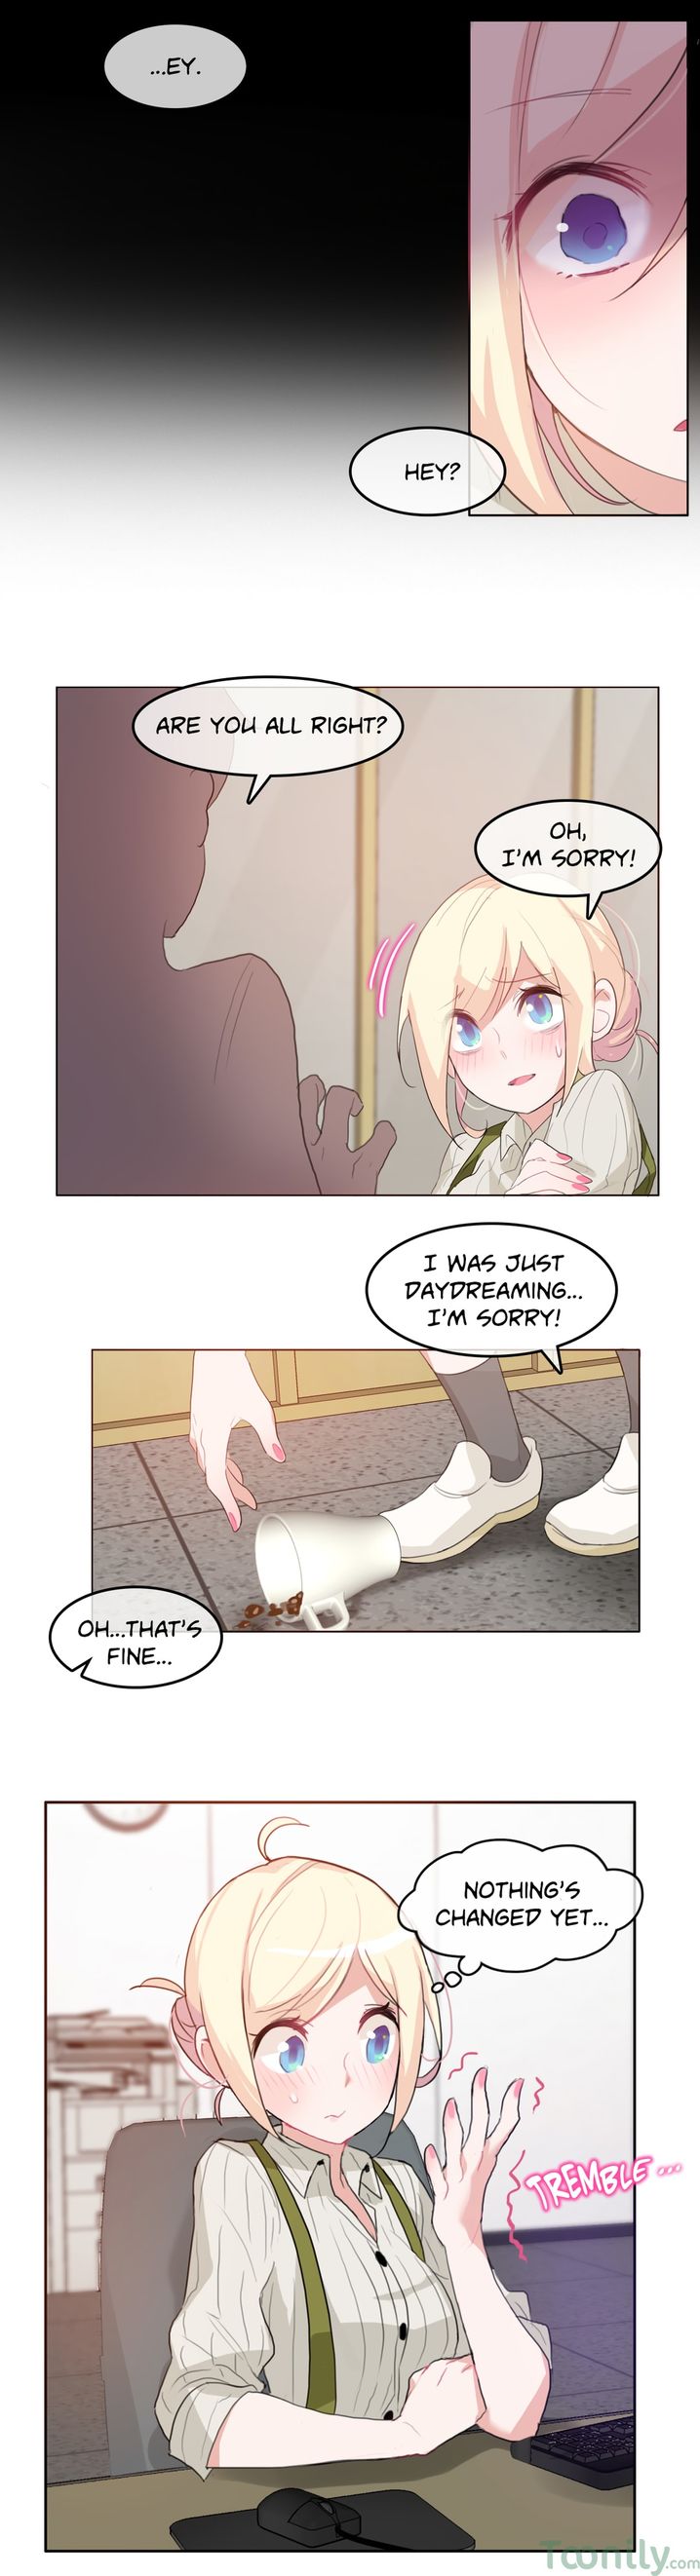 A Pervert’s Daily Life - Chapter 8 Page 8